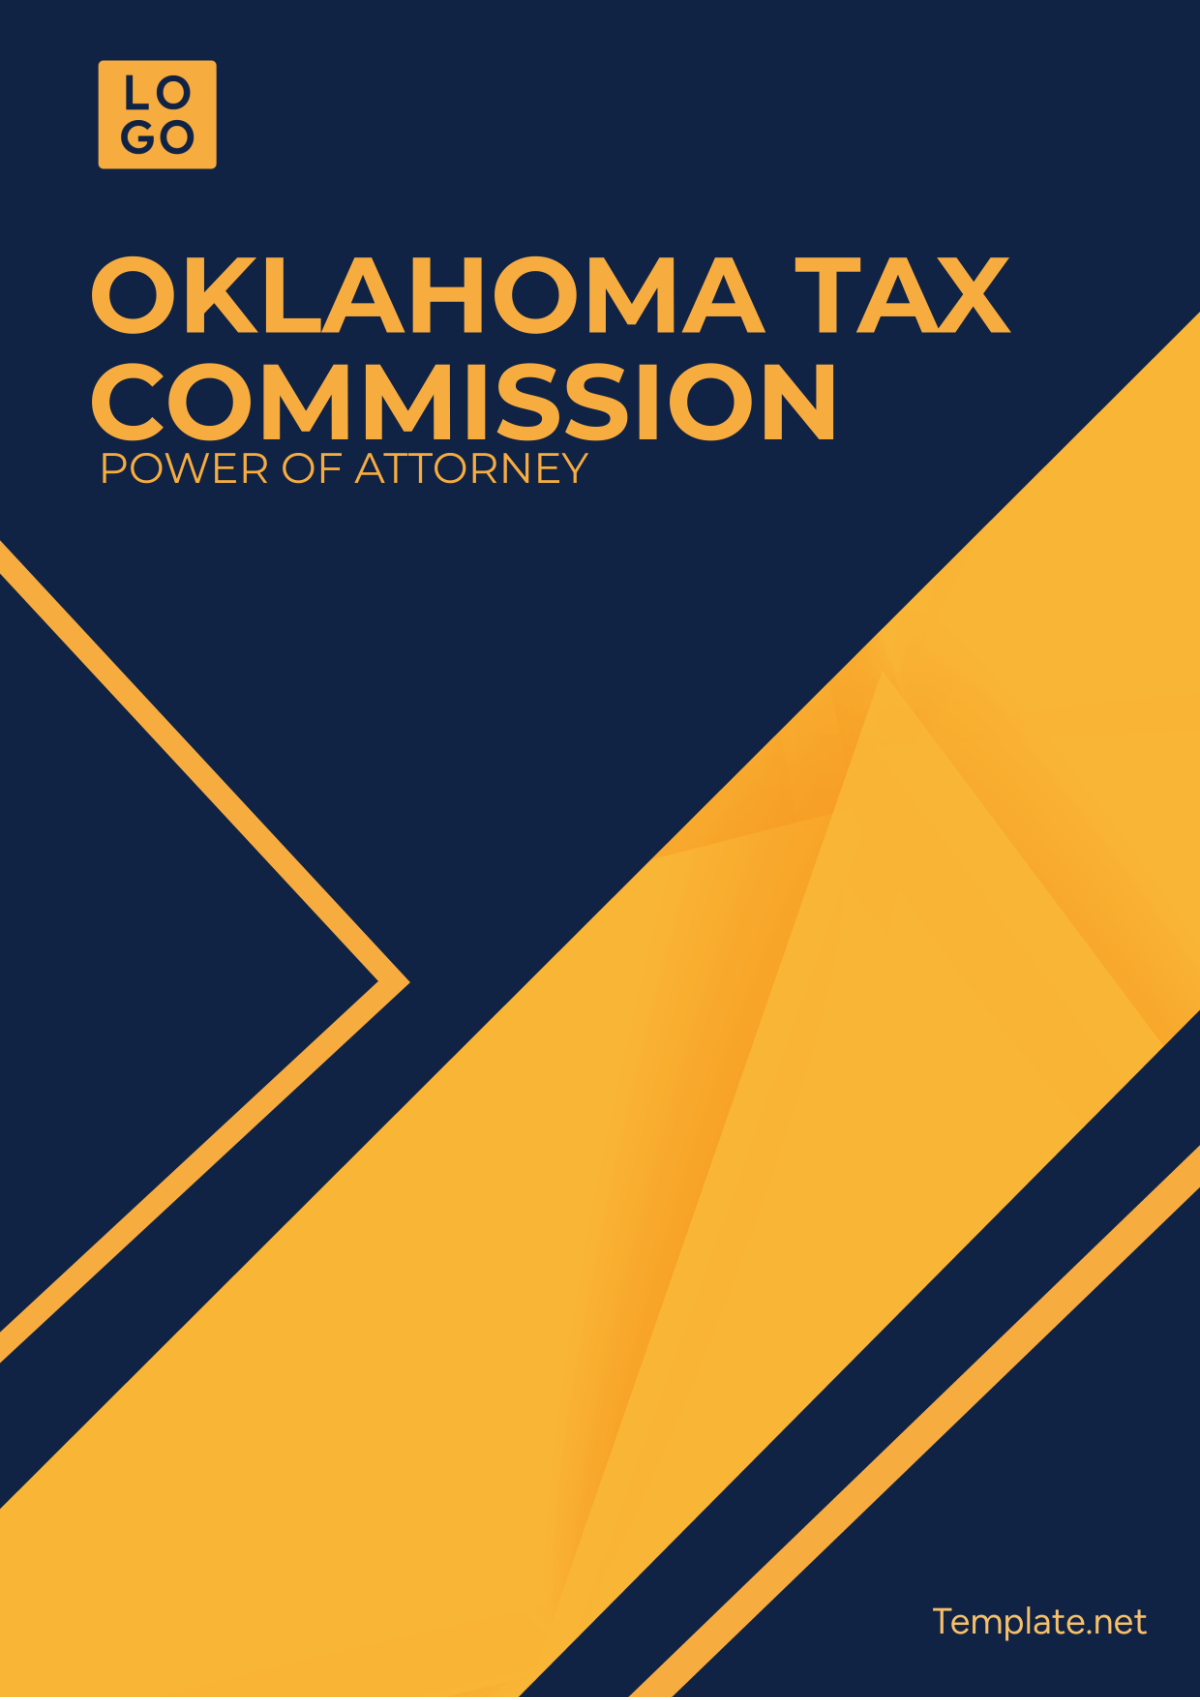 Oklahoma Tax Commission Power of Attorney Template